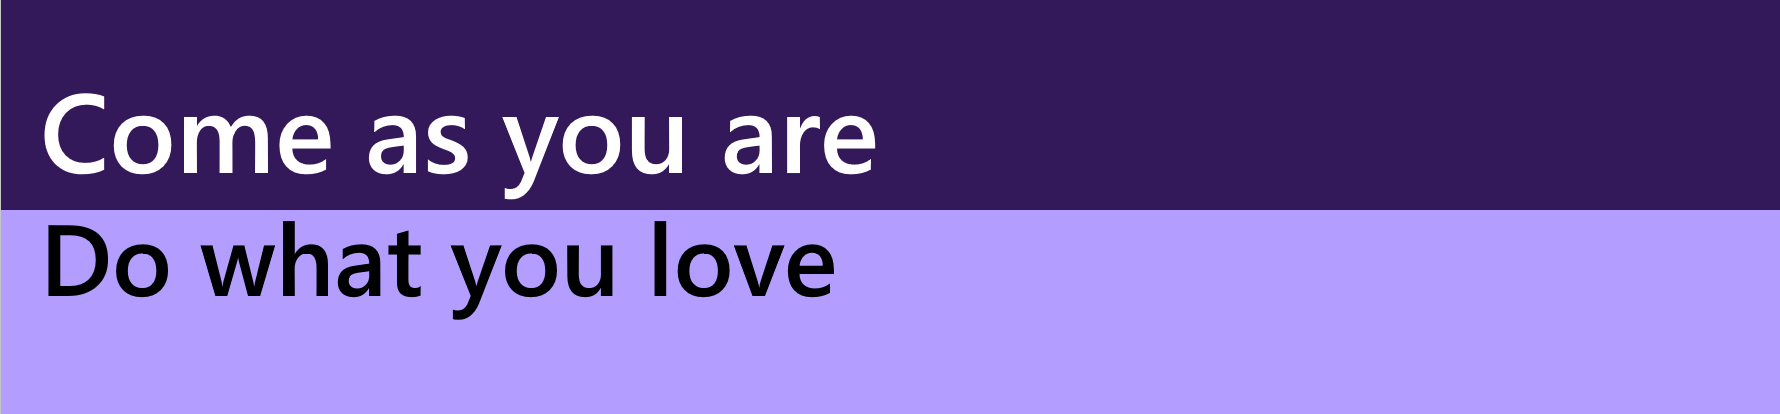 Purple rectangle with the following text overlayed: "Come as you are. Do what you love."